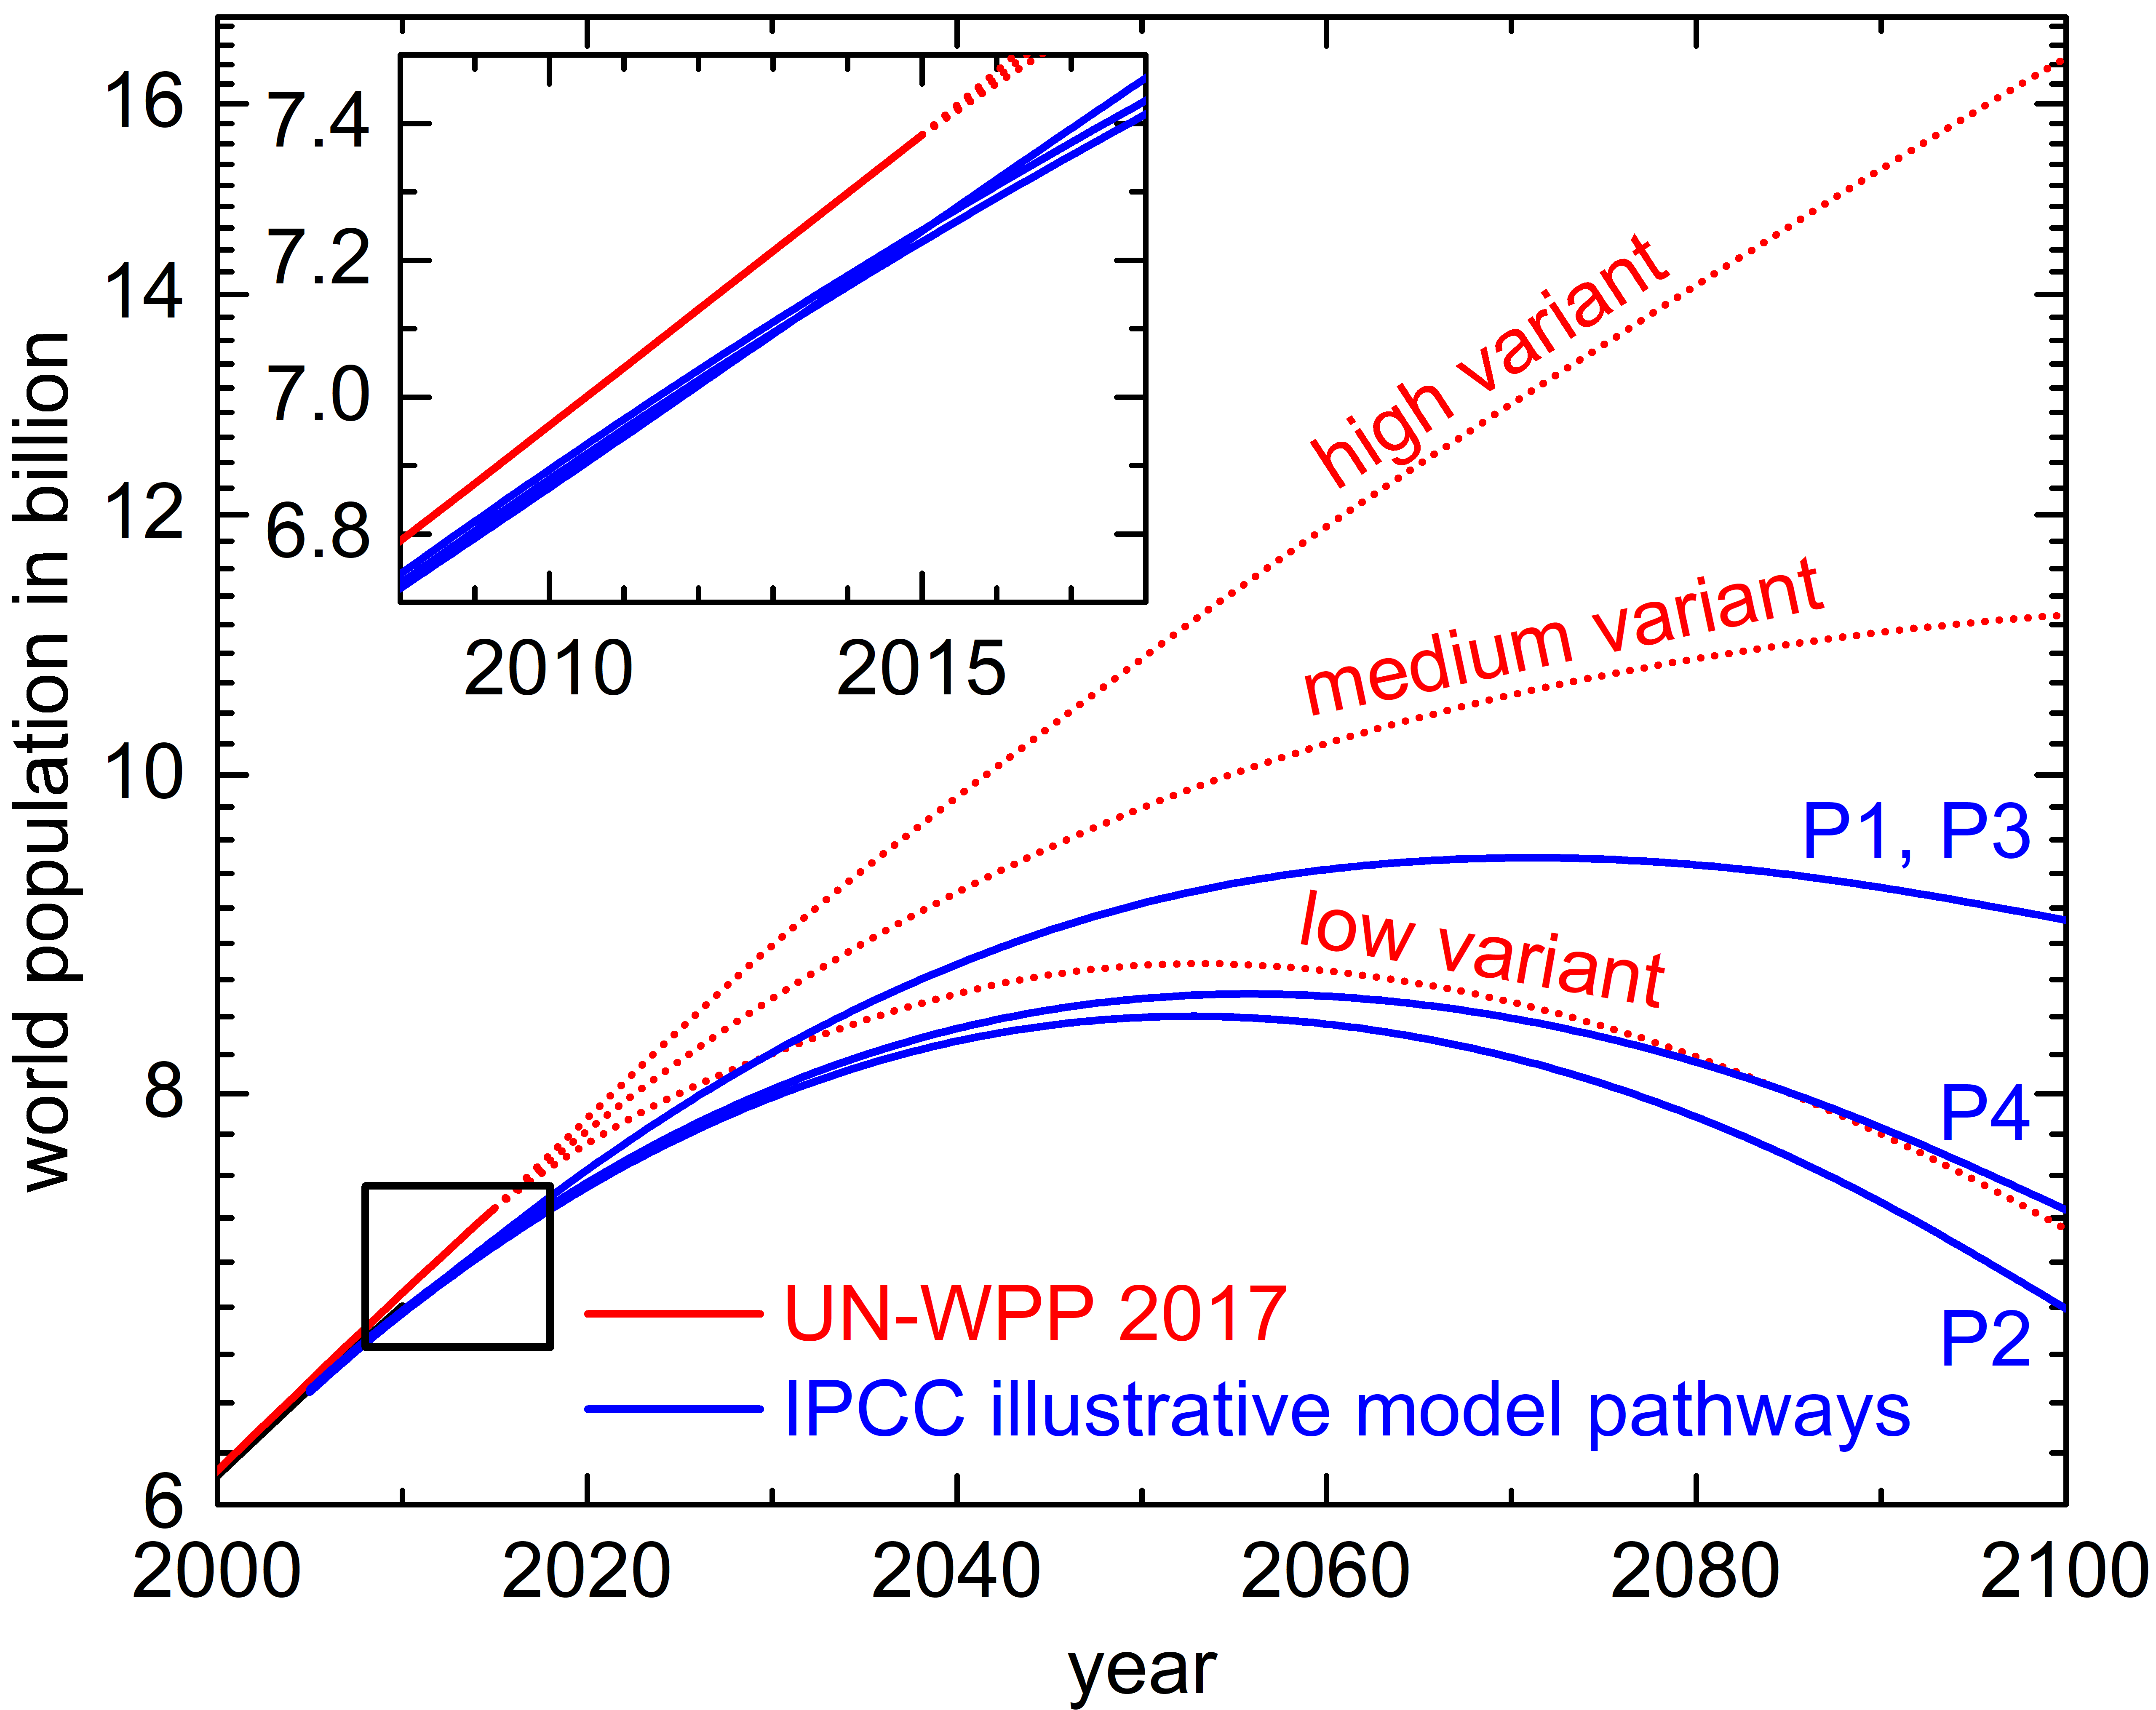 Population scenarios of the Illustrative Model Pathways of the Special Report of the Intergovernmental Panel on 1.5°C Climate Change compared to current UN projections